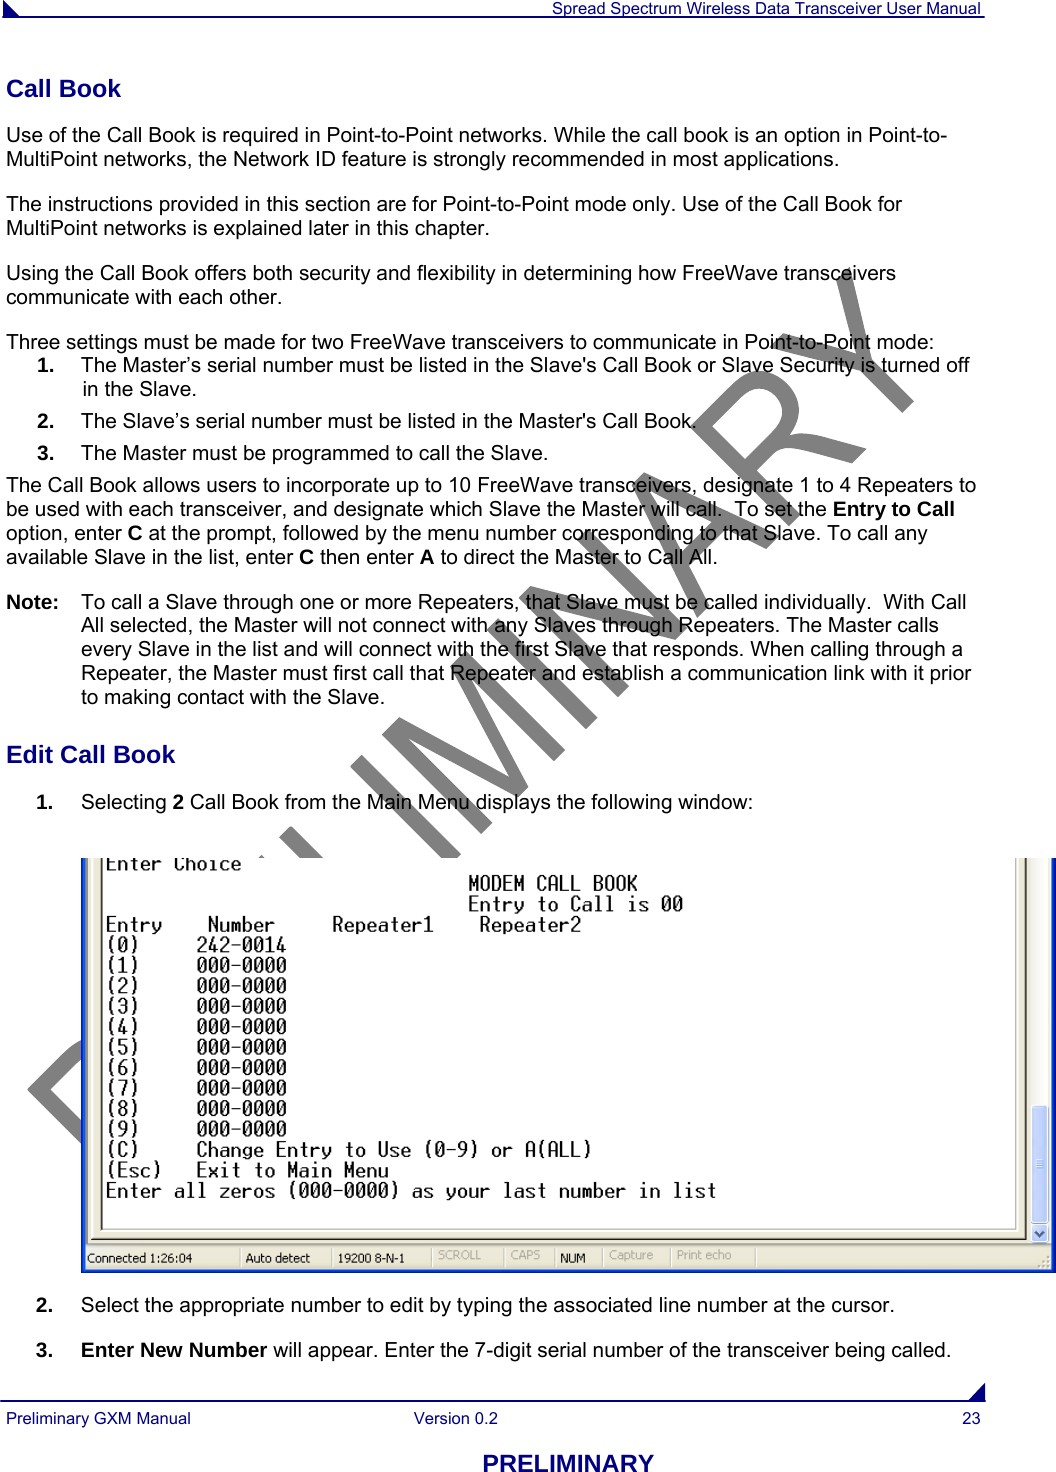  Spread Spectrum Wireless Data Transceiver User Manual Preliminary GXM Manual  Version 0.2  23 PRELIMINARY Call Book  Use of the Call Book is required in Point-to-Point networks. While the call book is an option in Point-to-MultiPoint networks, the Network ID feature is strongly recommended in most applications.  The instructions provided in this section are for Point-to-Point mode only. Use of the Call Book for MultiPoint networks is explained later in this chapter. Using the Call Book offers both security and flexibility in determining how FreeWave transceivers communicate with each other.  Three settings must be made for two FreeWave transceivers to communicate in Point-to-Point mode: 1.  The Master’s serial number must be listed in the Slave&apos;s Call Book or Slave Security is turned off in the Slave. 2.  The Slave’s serial number must be listed in the Master&apos;s Call Book. 3.  The Master must be programmed to call the Slave. The Call Book allows users to incorporate up to 10 FreeWave transceivers, designate 1 to 4 Repeaters to be used with each transceiver, and designate which Slave the Master will call.  To set the Entry to Call option, enter C at the prompt, followed by the menu number corresponding to that Slave. To call any available Slave in the list, enter C then enter A to direct the Master to Call All. Note:  To call a Slave through one or more Repeaters, that Slave must be called individually.  With Call All selected, the Master will not connect with any Slaves through Repeaters. The Master calls every Slave in the list and will connect with the first Slave that responds. When calling through a Repeater, the Master must first call that Repeater and establish a communication link with it prior to making contact with the Slave.  Edit Call Book                                                                                                                                      1.  Selecting 2 Call Book from the Main Menu displays the following window:   2.  Select the appropriate number to edit by typing the associated line number at the cursor. 3. Enter New Number will appear. Enter the 7-digit serial number of the transceiver being called. 